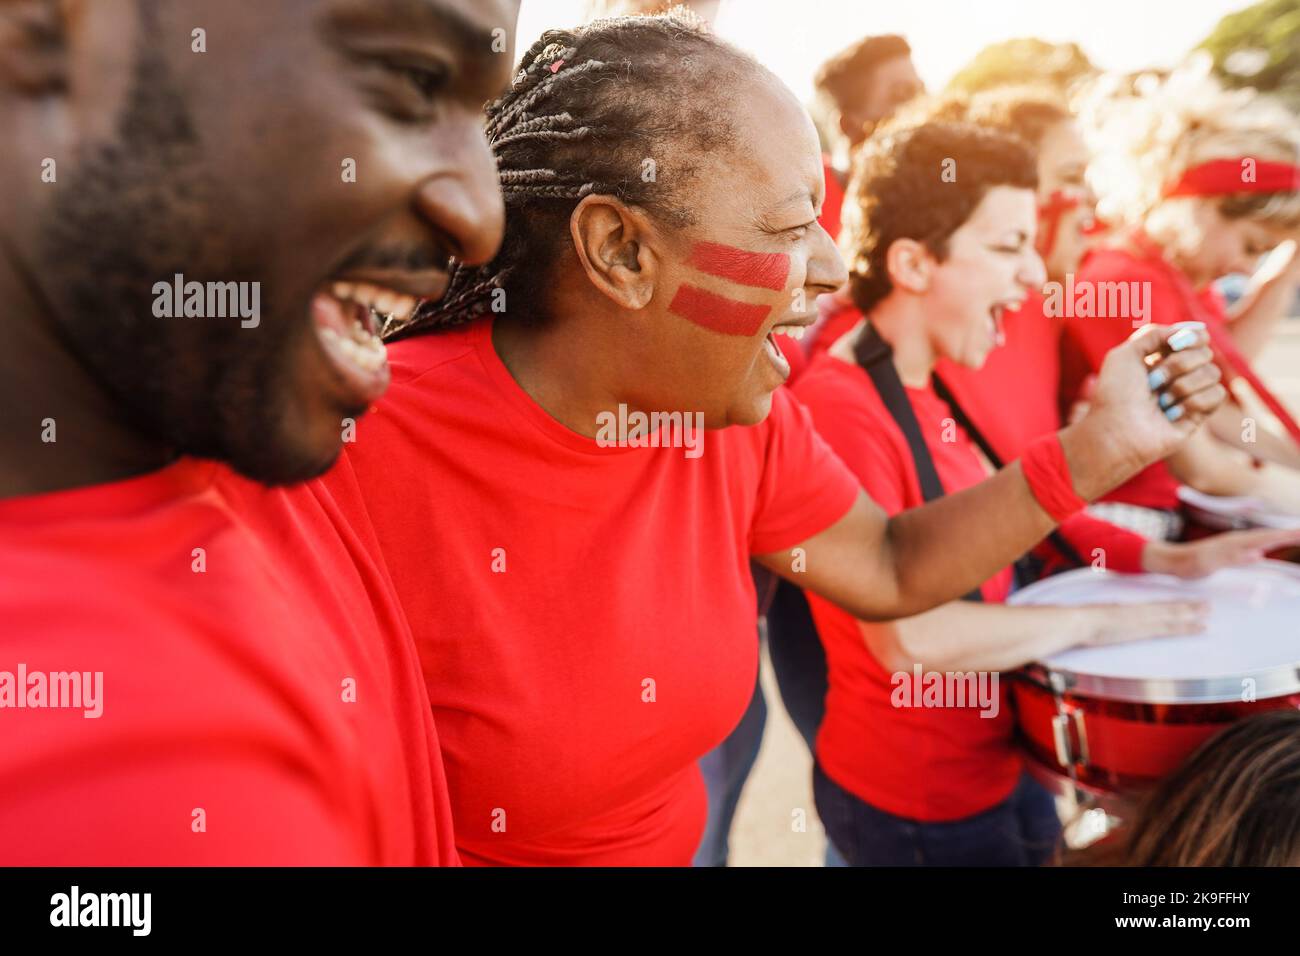 Multiracial red sport fans screaming while supporting their team - Football supporters having fun at competition event - Focus on senior woman face Stock Photo